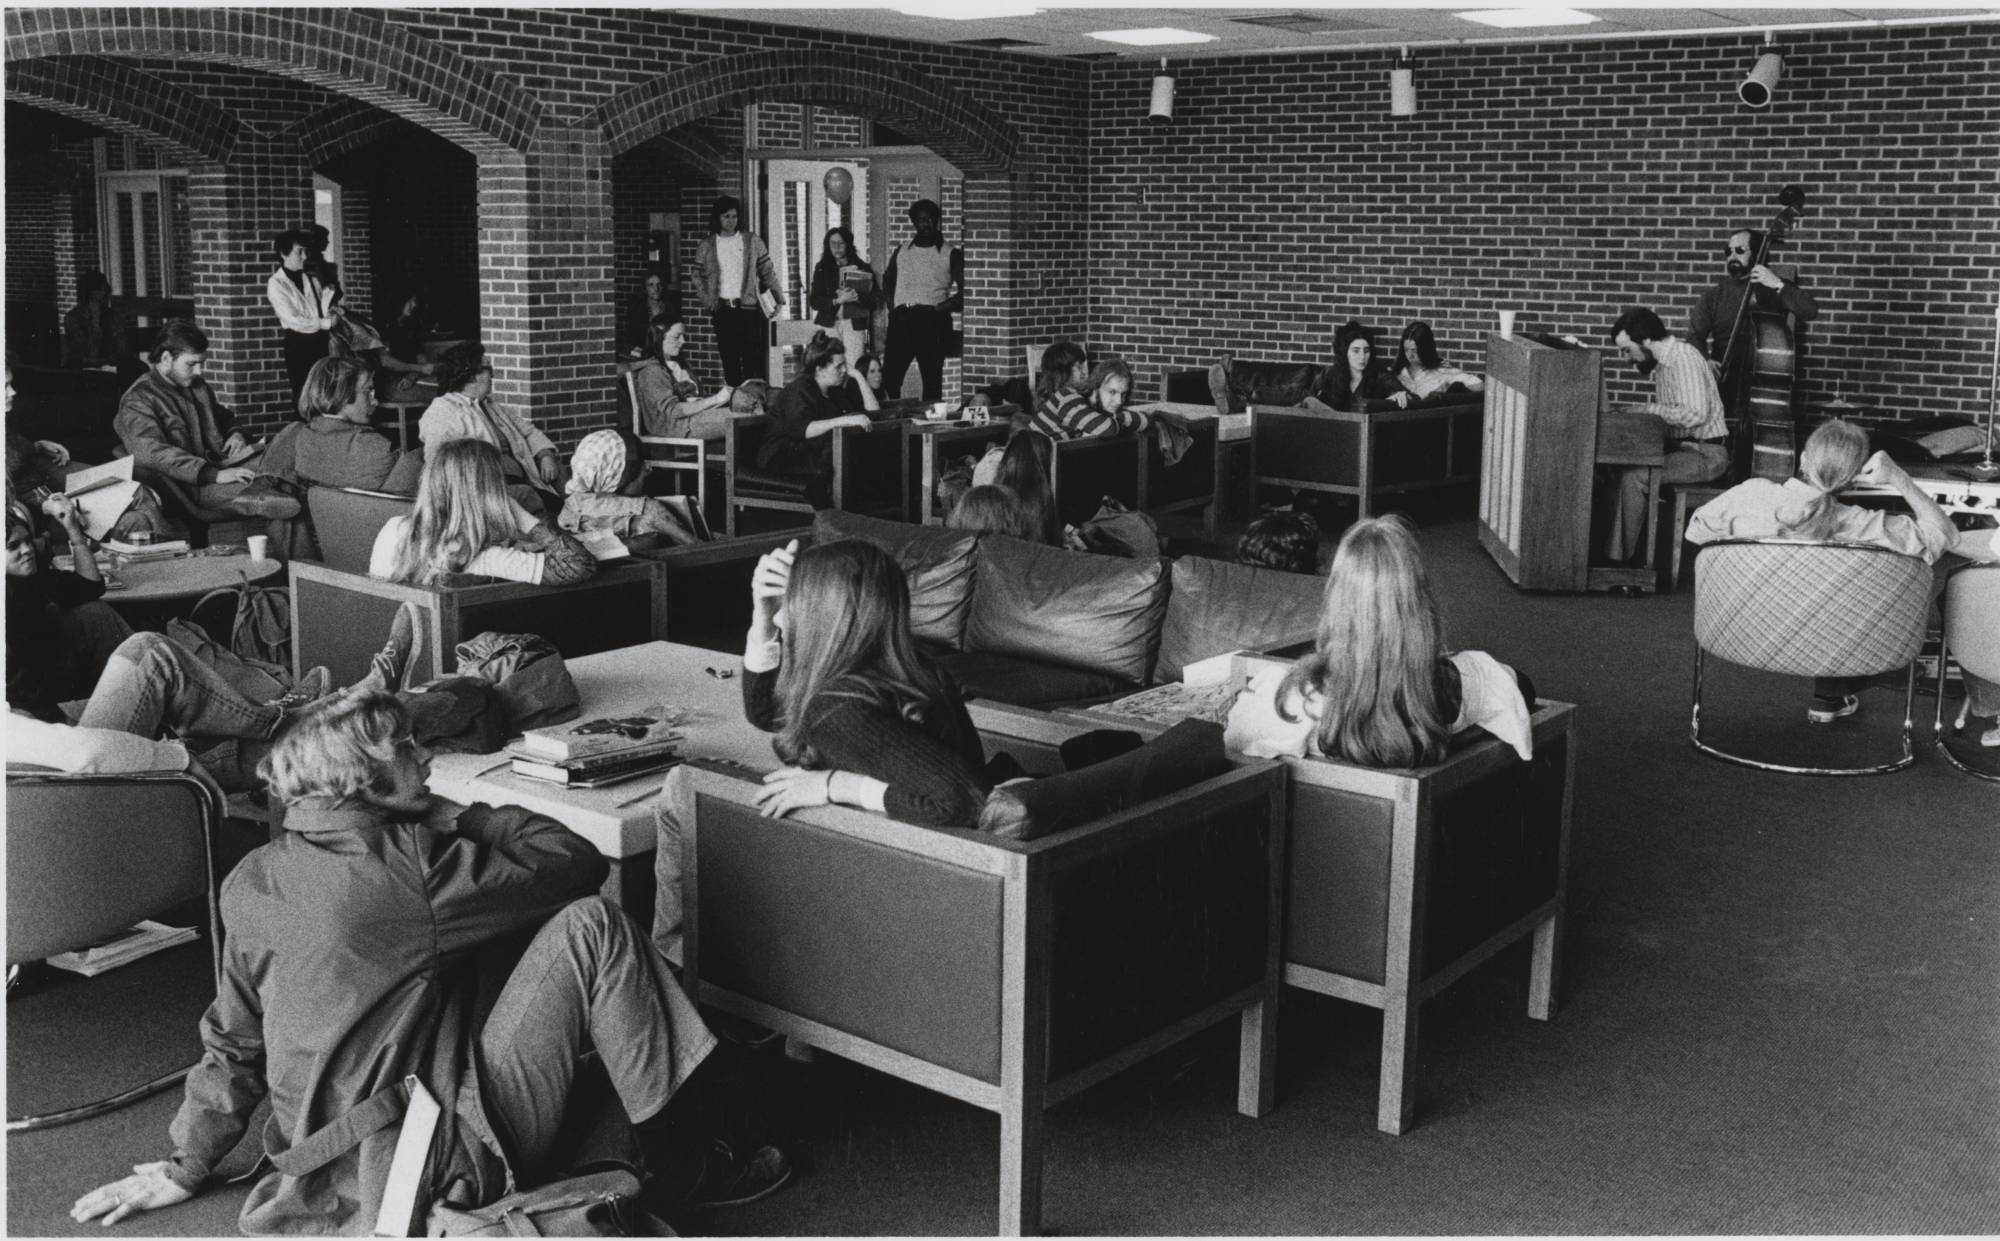 Students listening to music being performed in Campus Center lounge, ca. 1977.